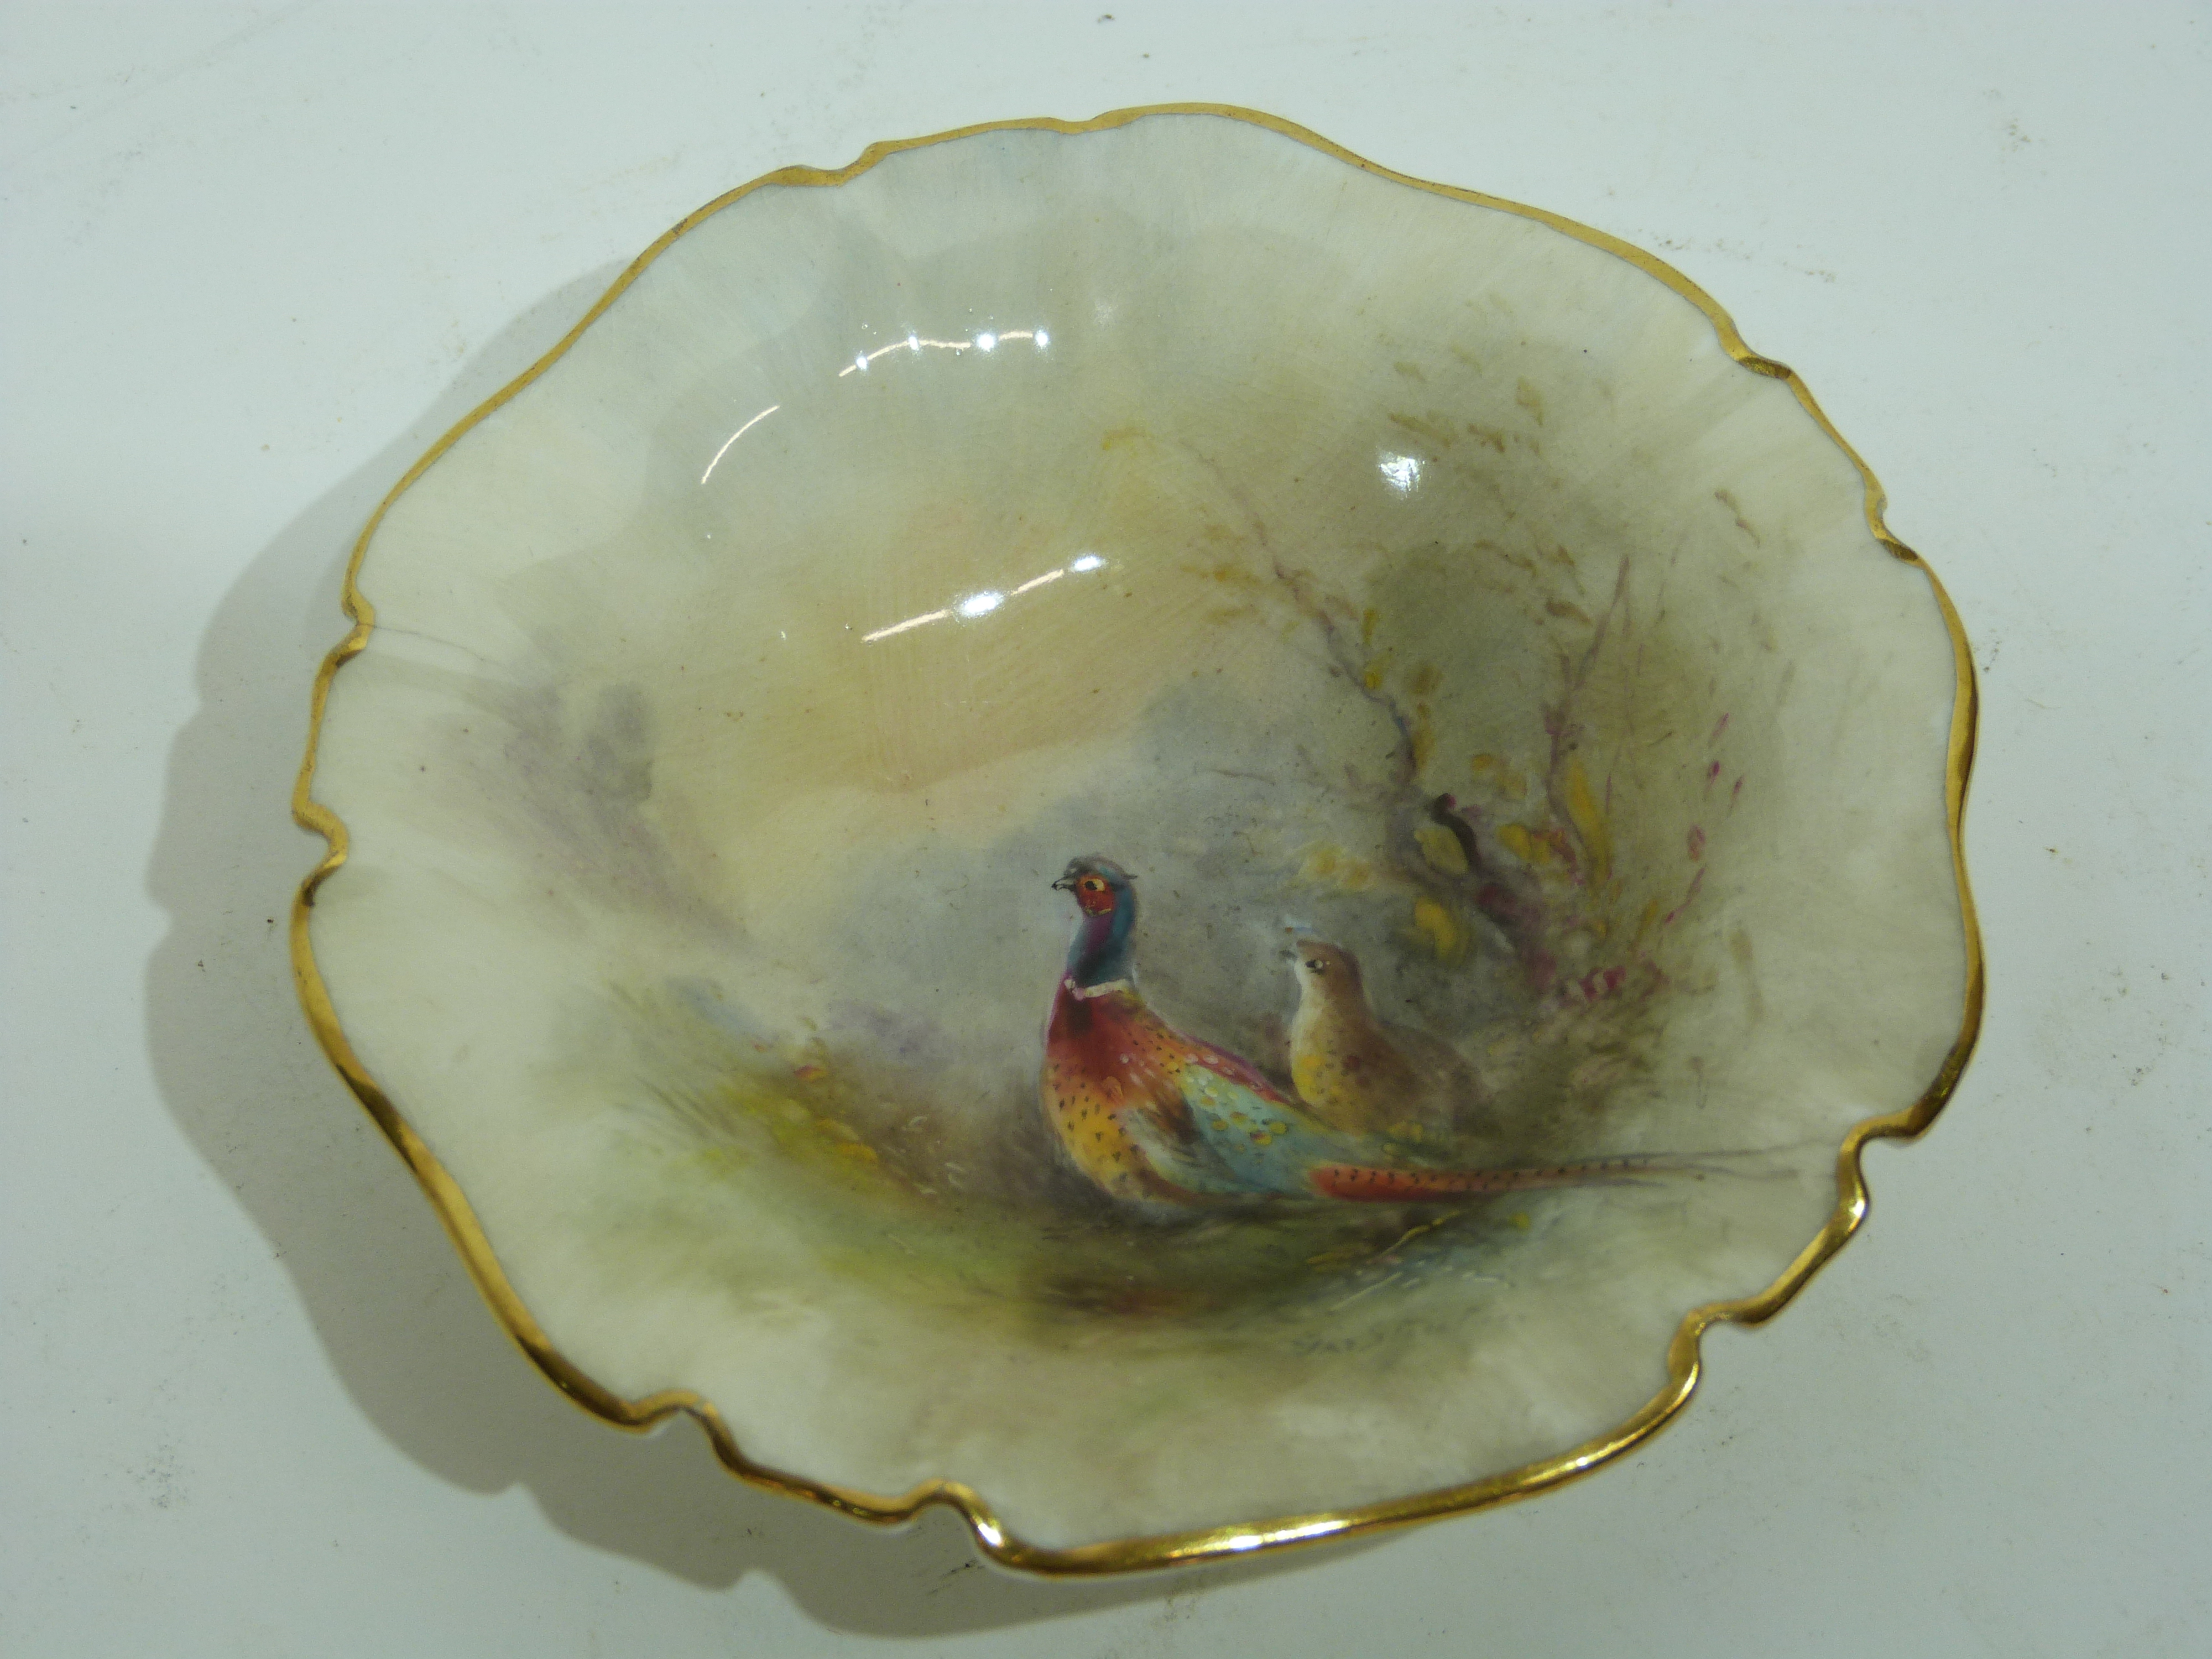 Small Royal Worcester pin dish decorated with pheasants by James Stinton, 9cm diam, Worcester puce